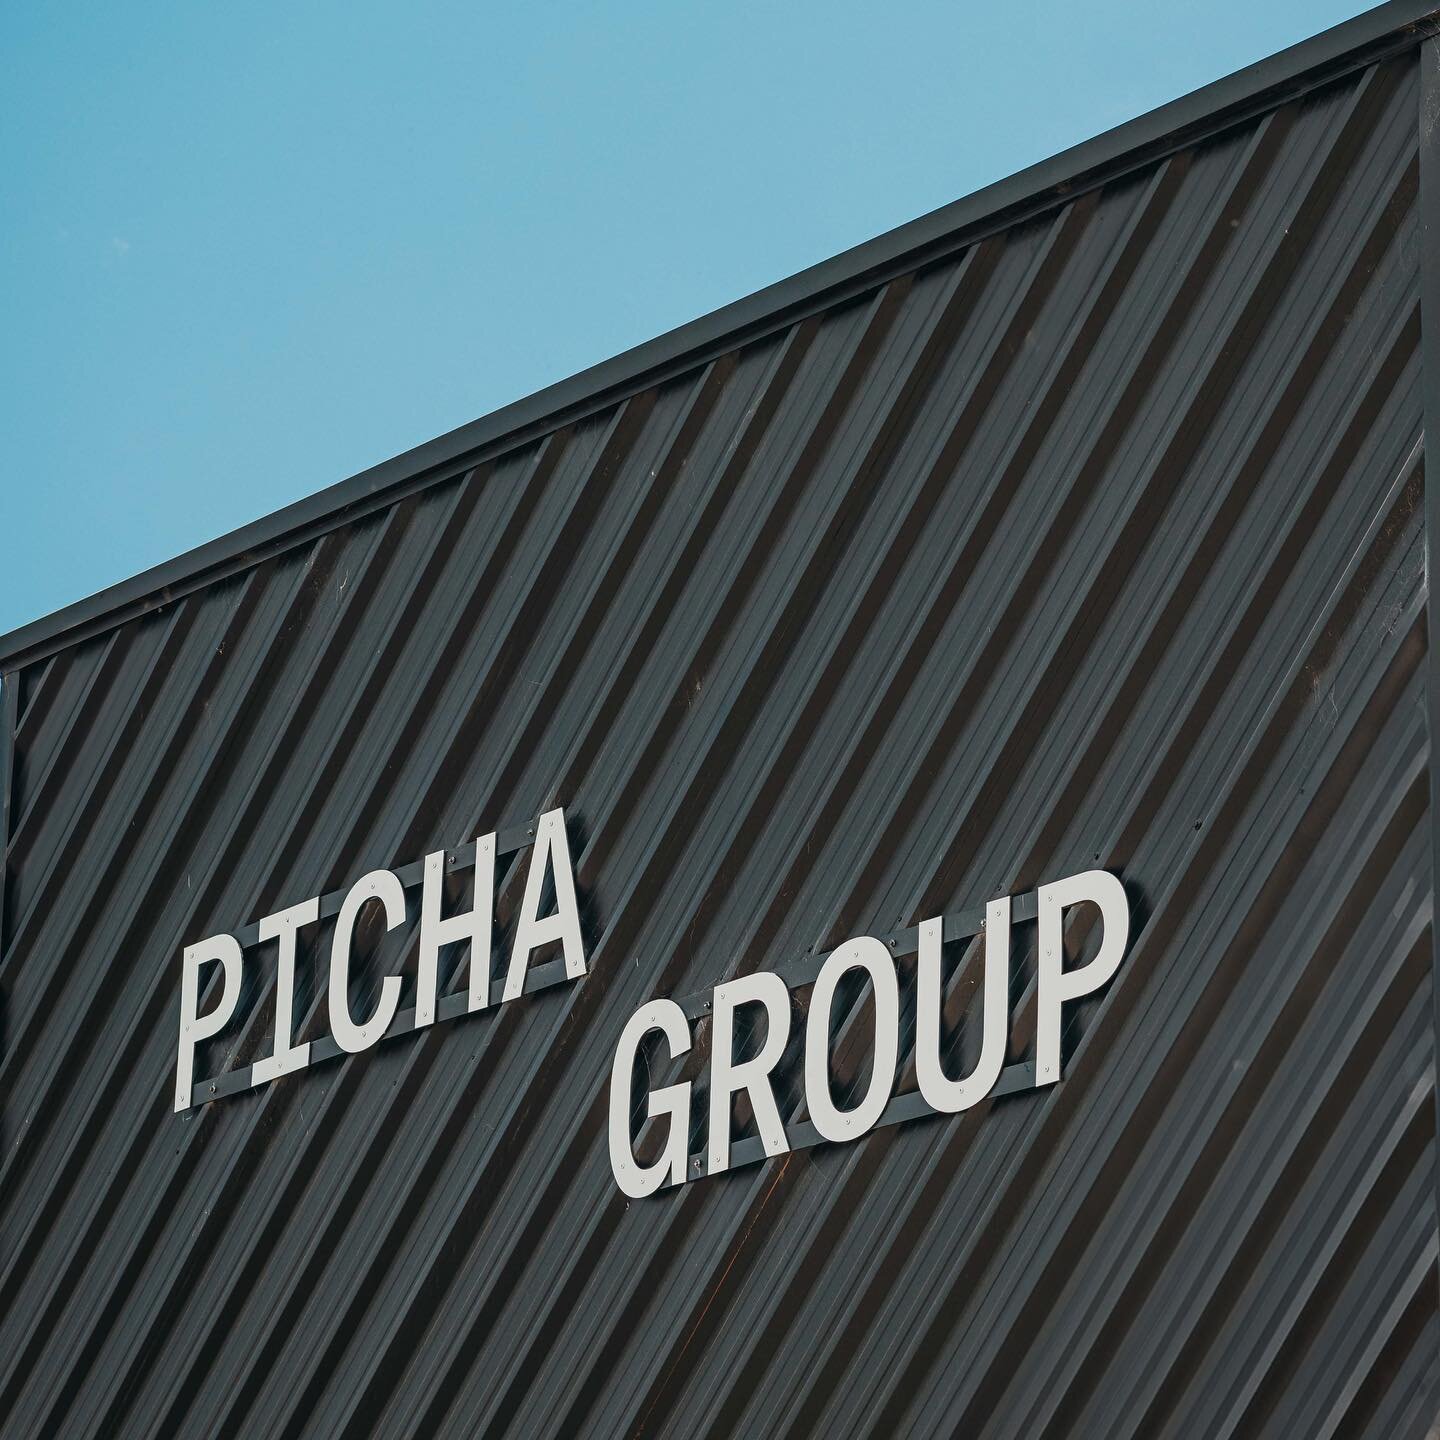 PICHA Group is your all-in-one destination for all things brand 💫  From dynamic activations to full rebranding, captivating signage to personalised retail solutions &ndash; we understand the importance of brand consistency. 
Let our dedicated team h